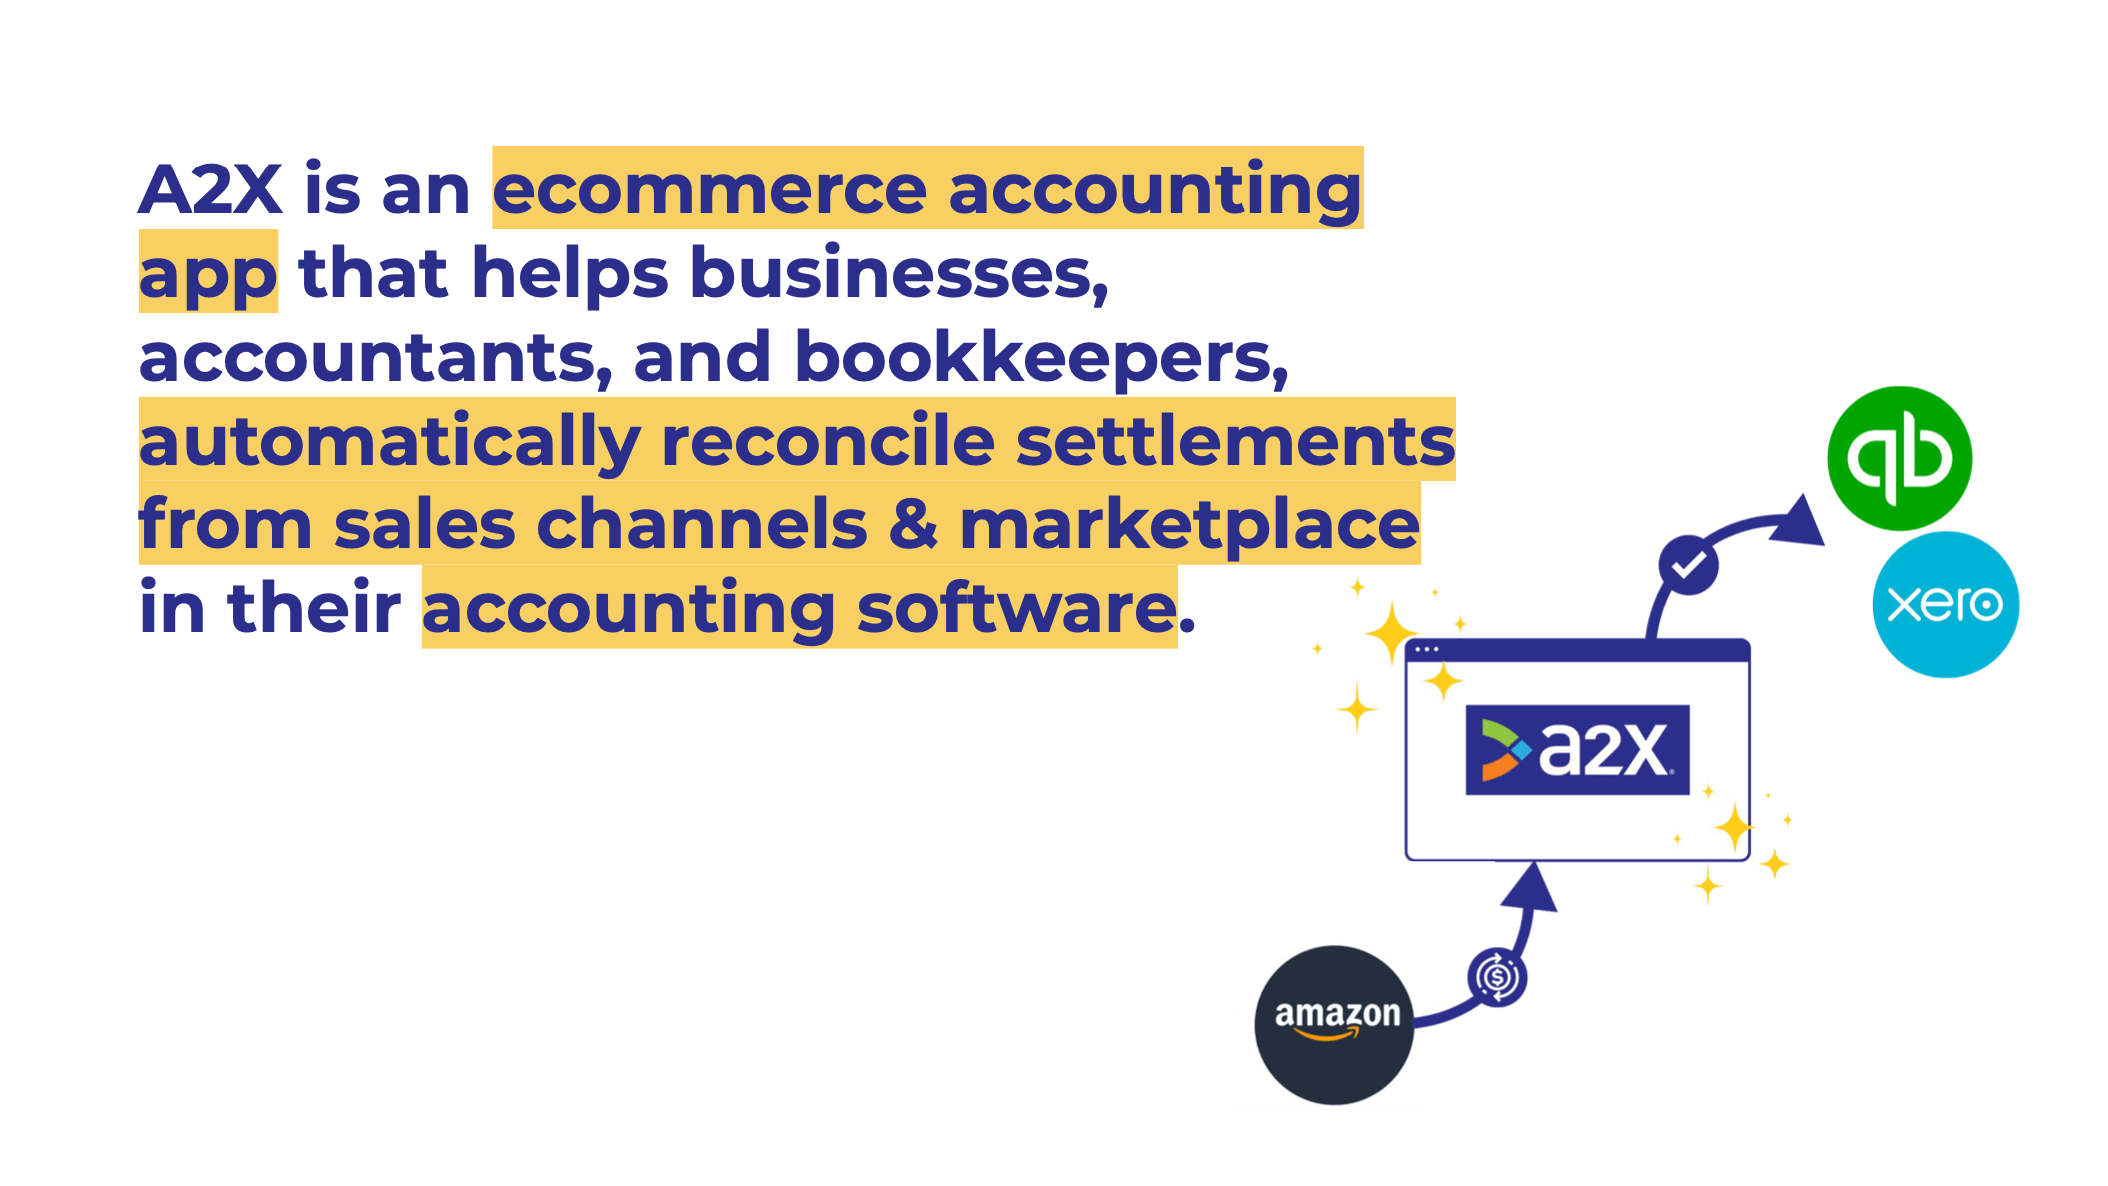 How A2X helps ecommerce business owners automate their accounting